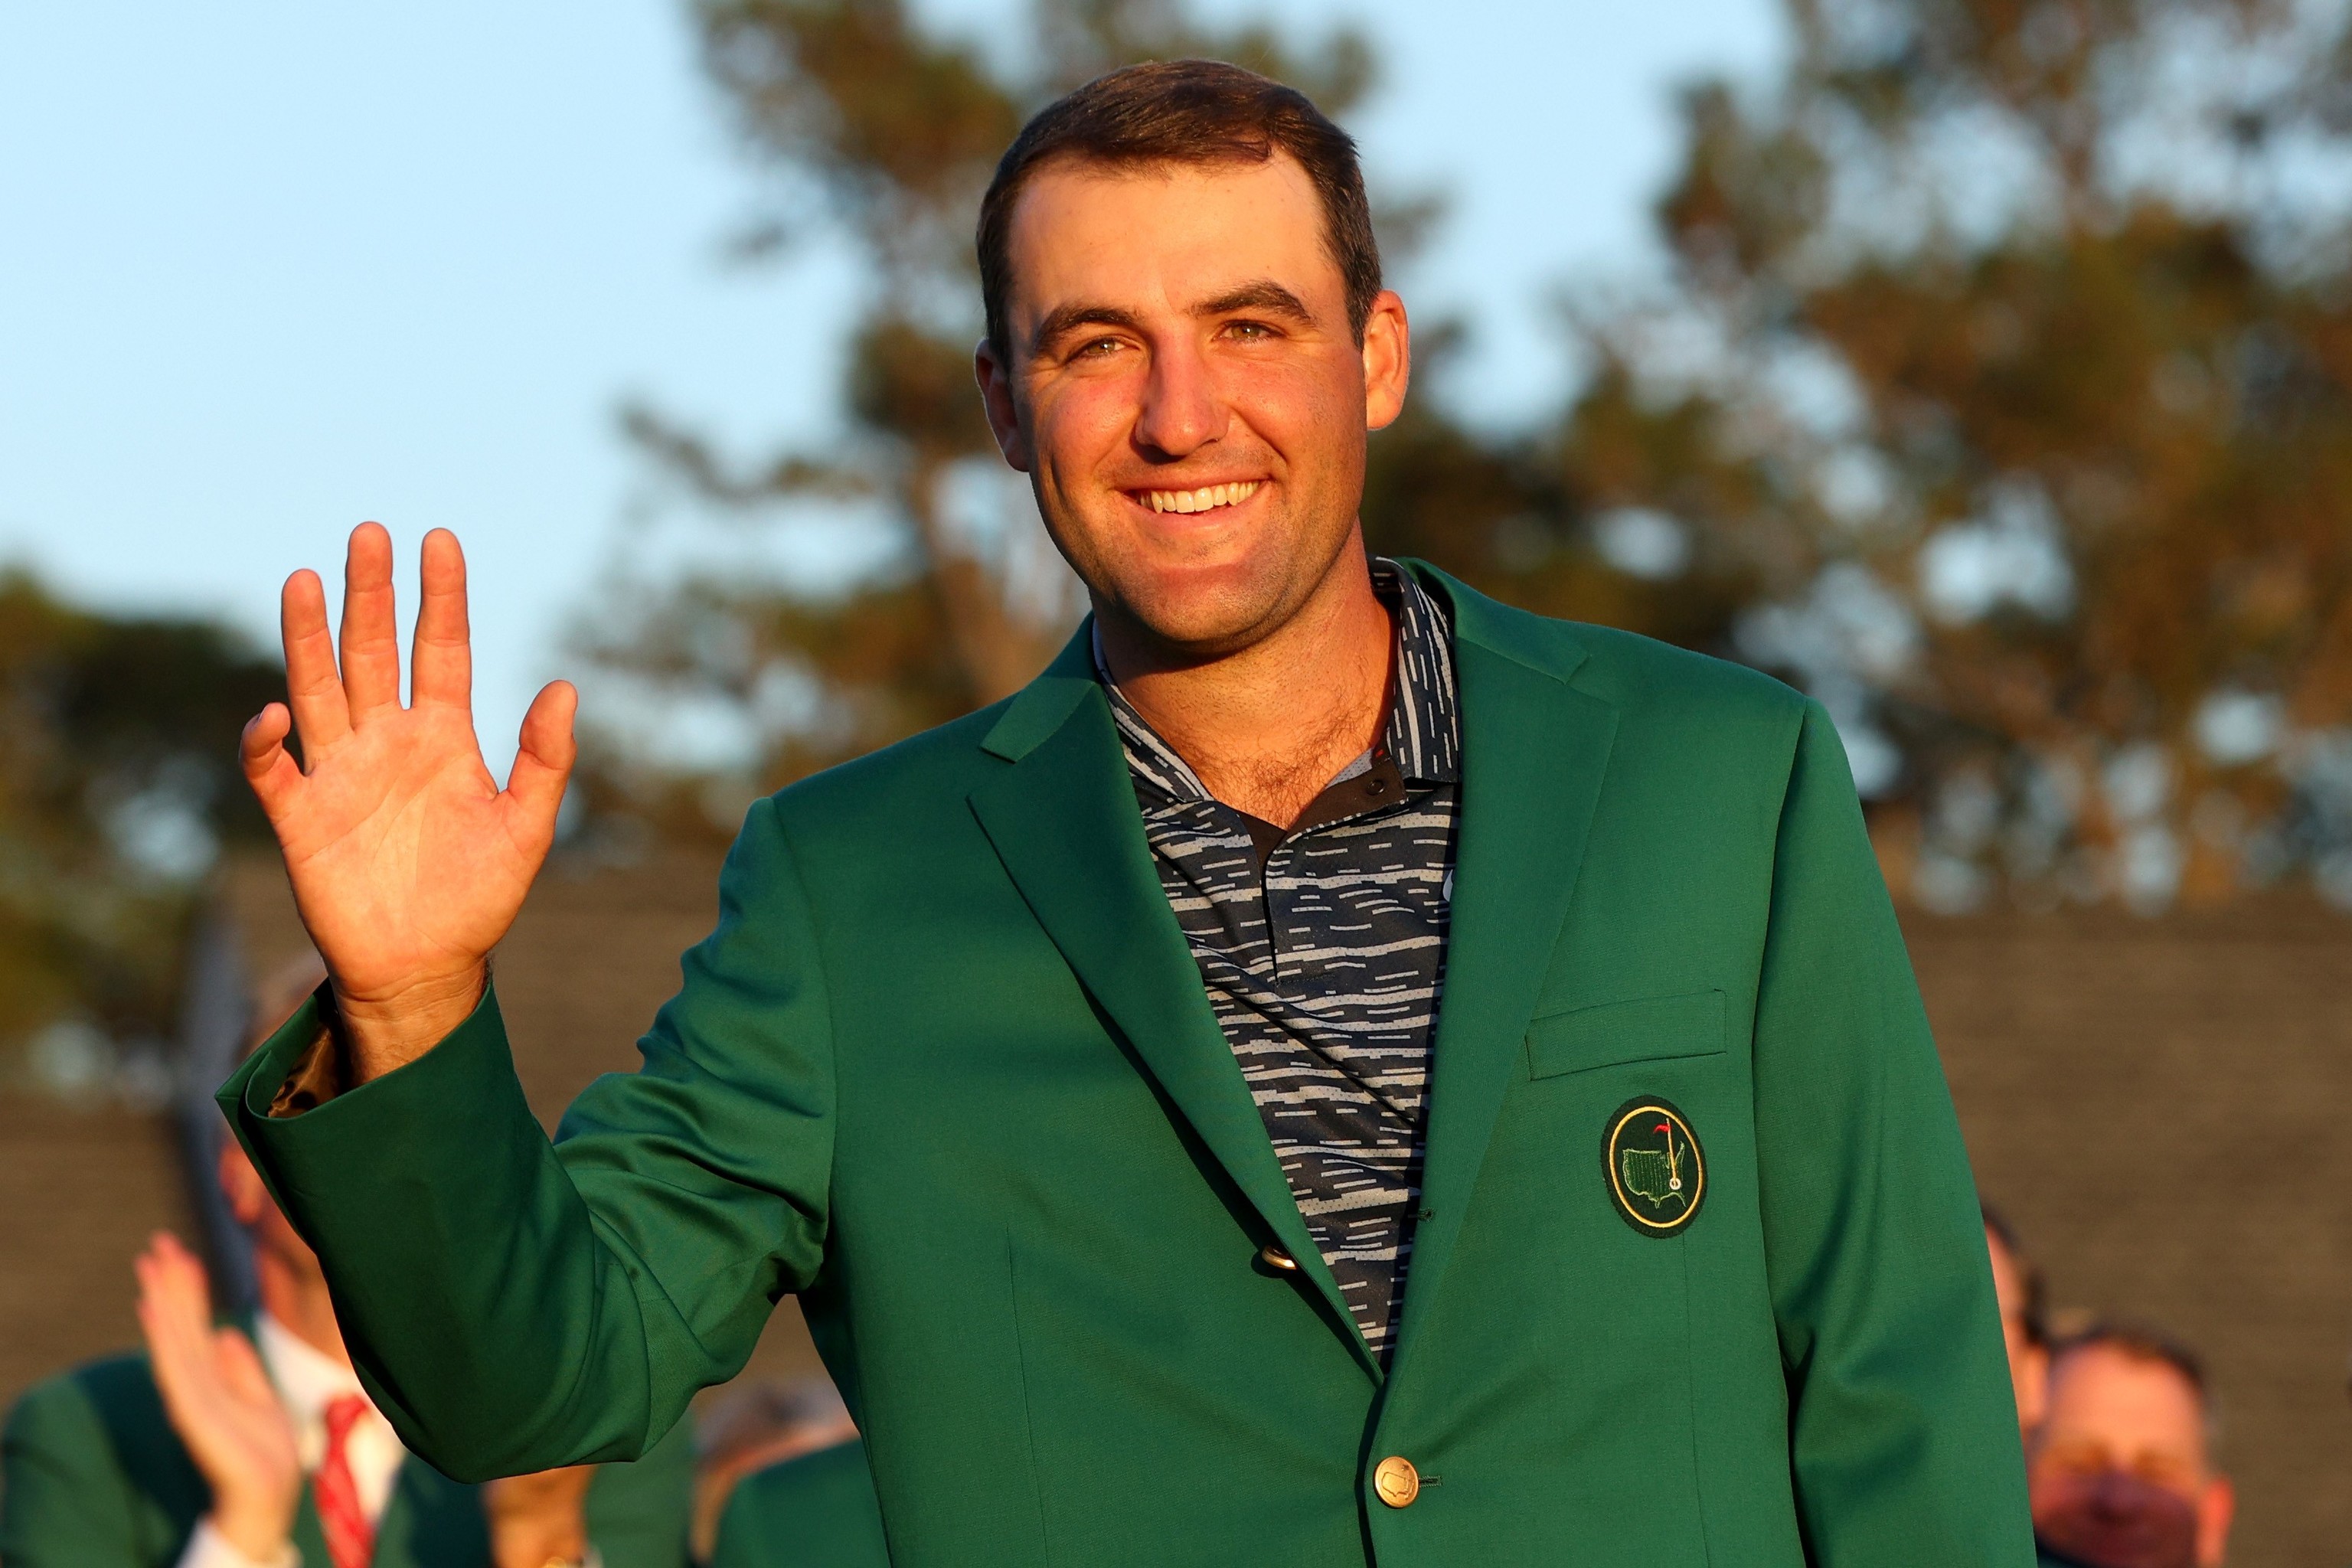 Scott Scheffler with the green jacket which recognized him as the winner of the Augusta Masters.